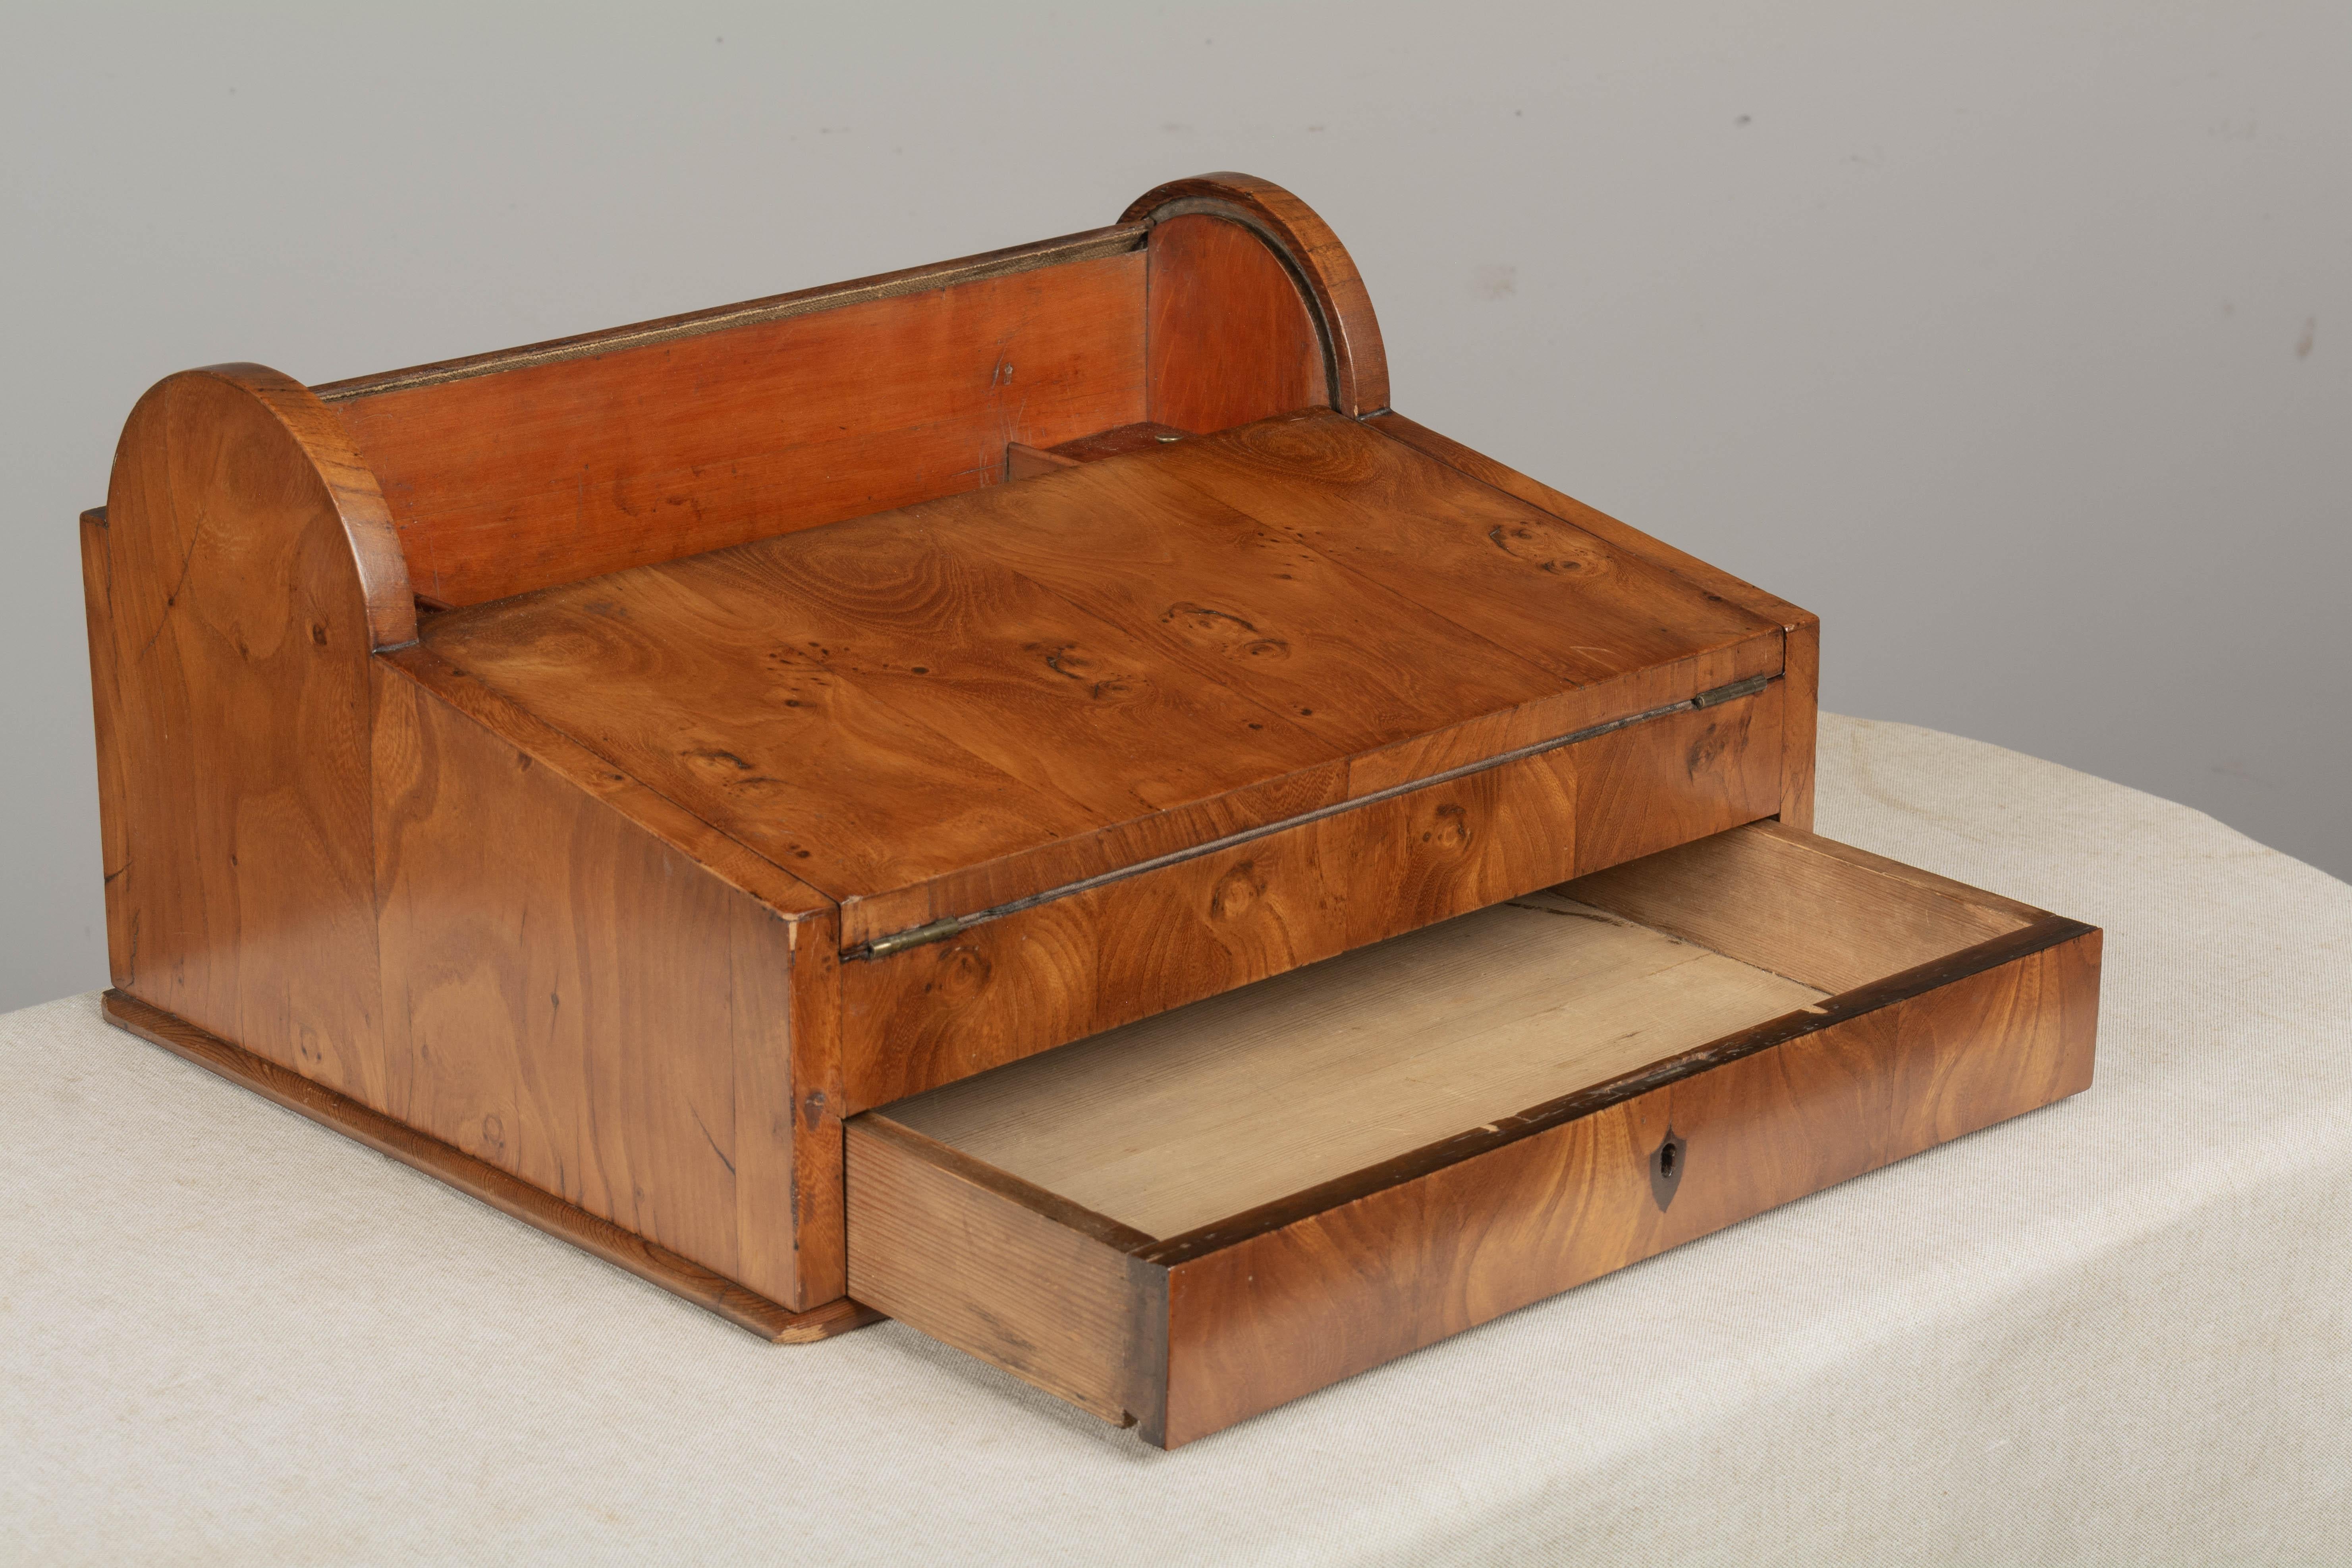 Hand-Crafted 19th Century English Campaign Lap Desk